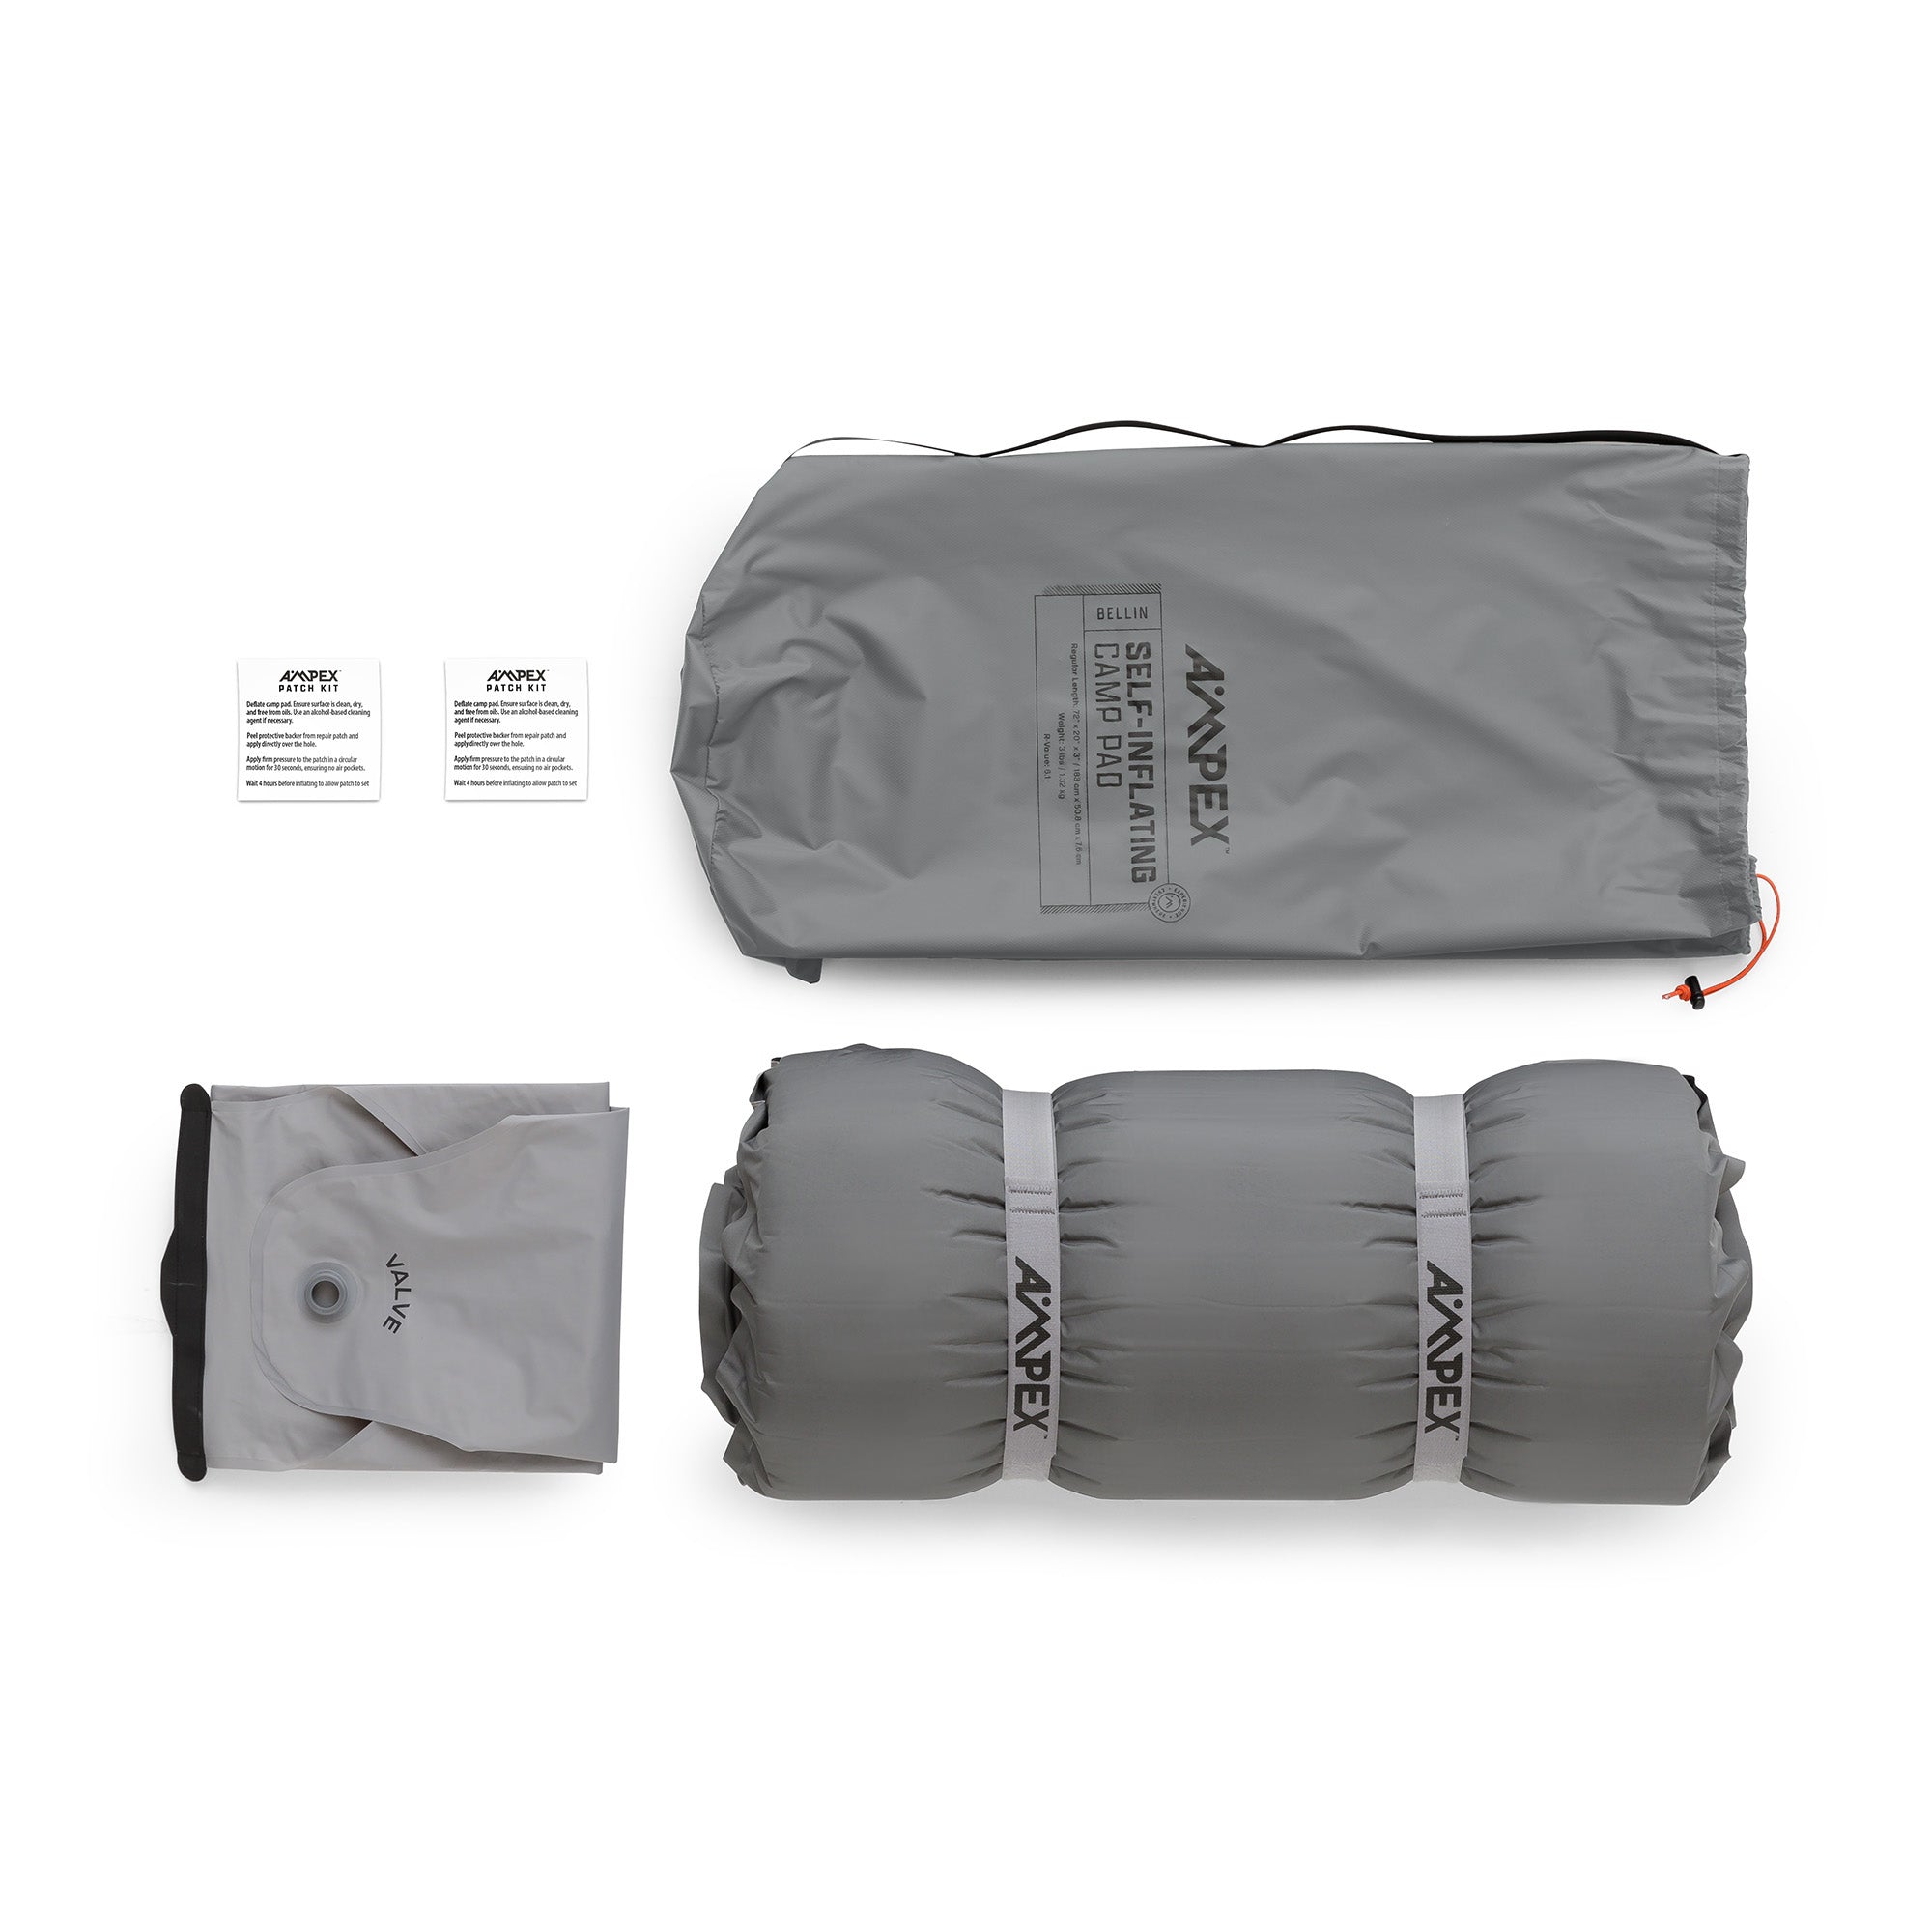 Insulated Camping Pad (Regular Size)